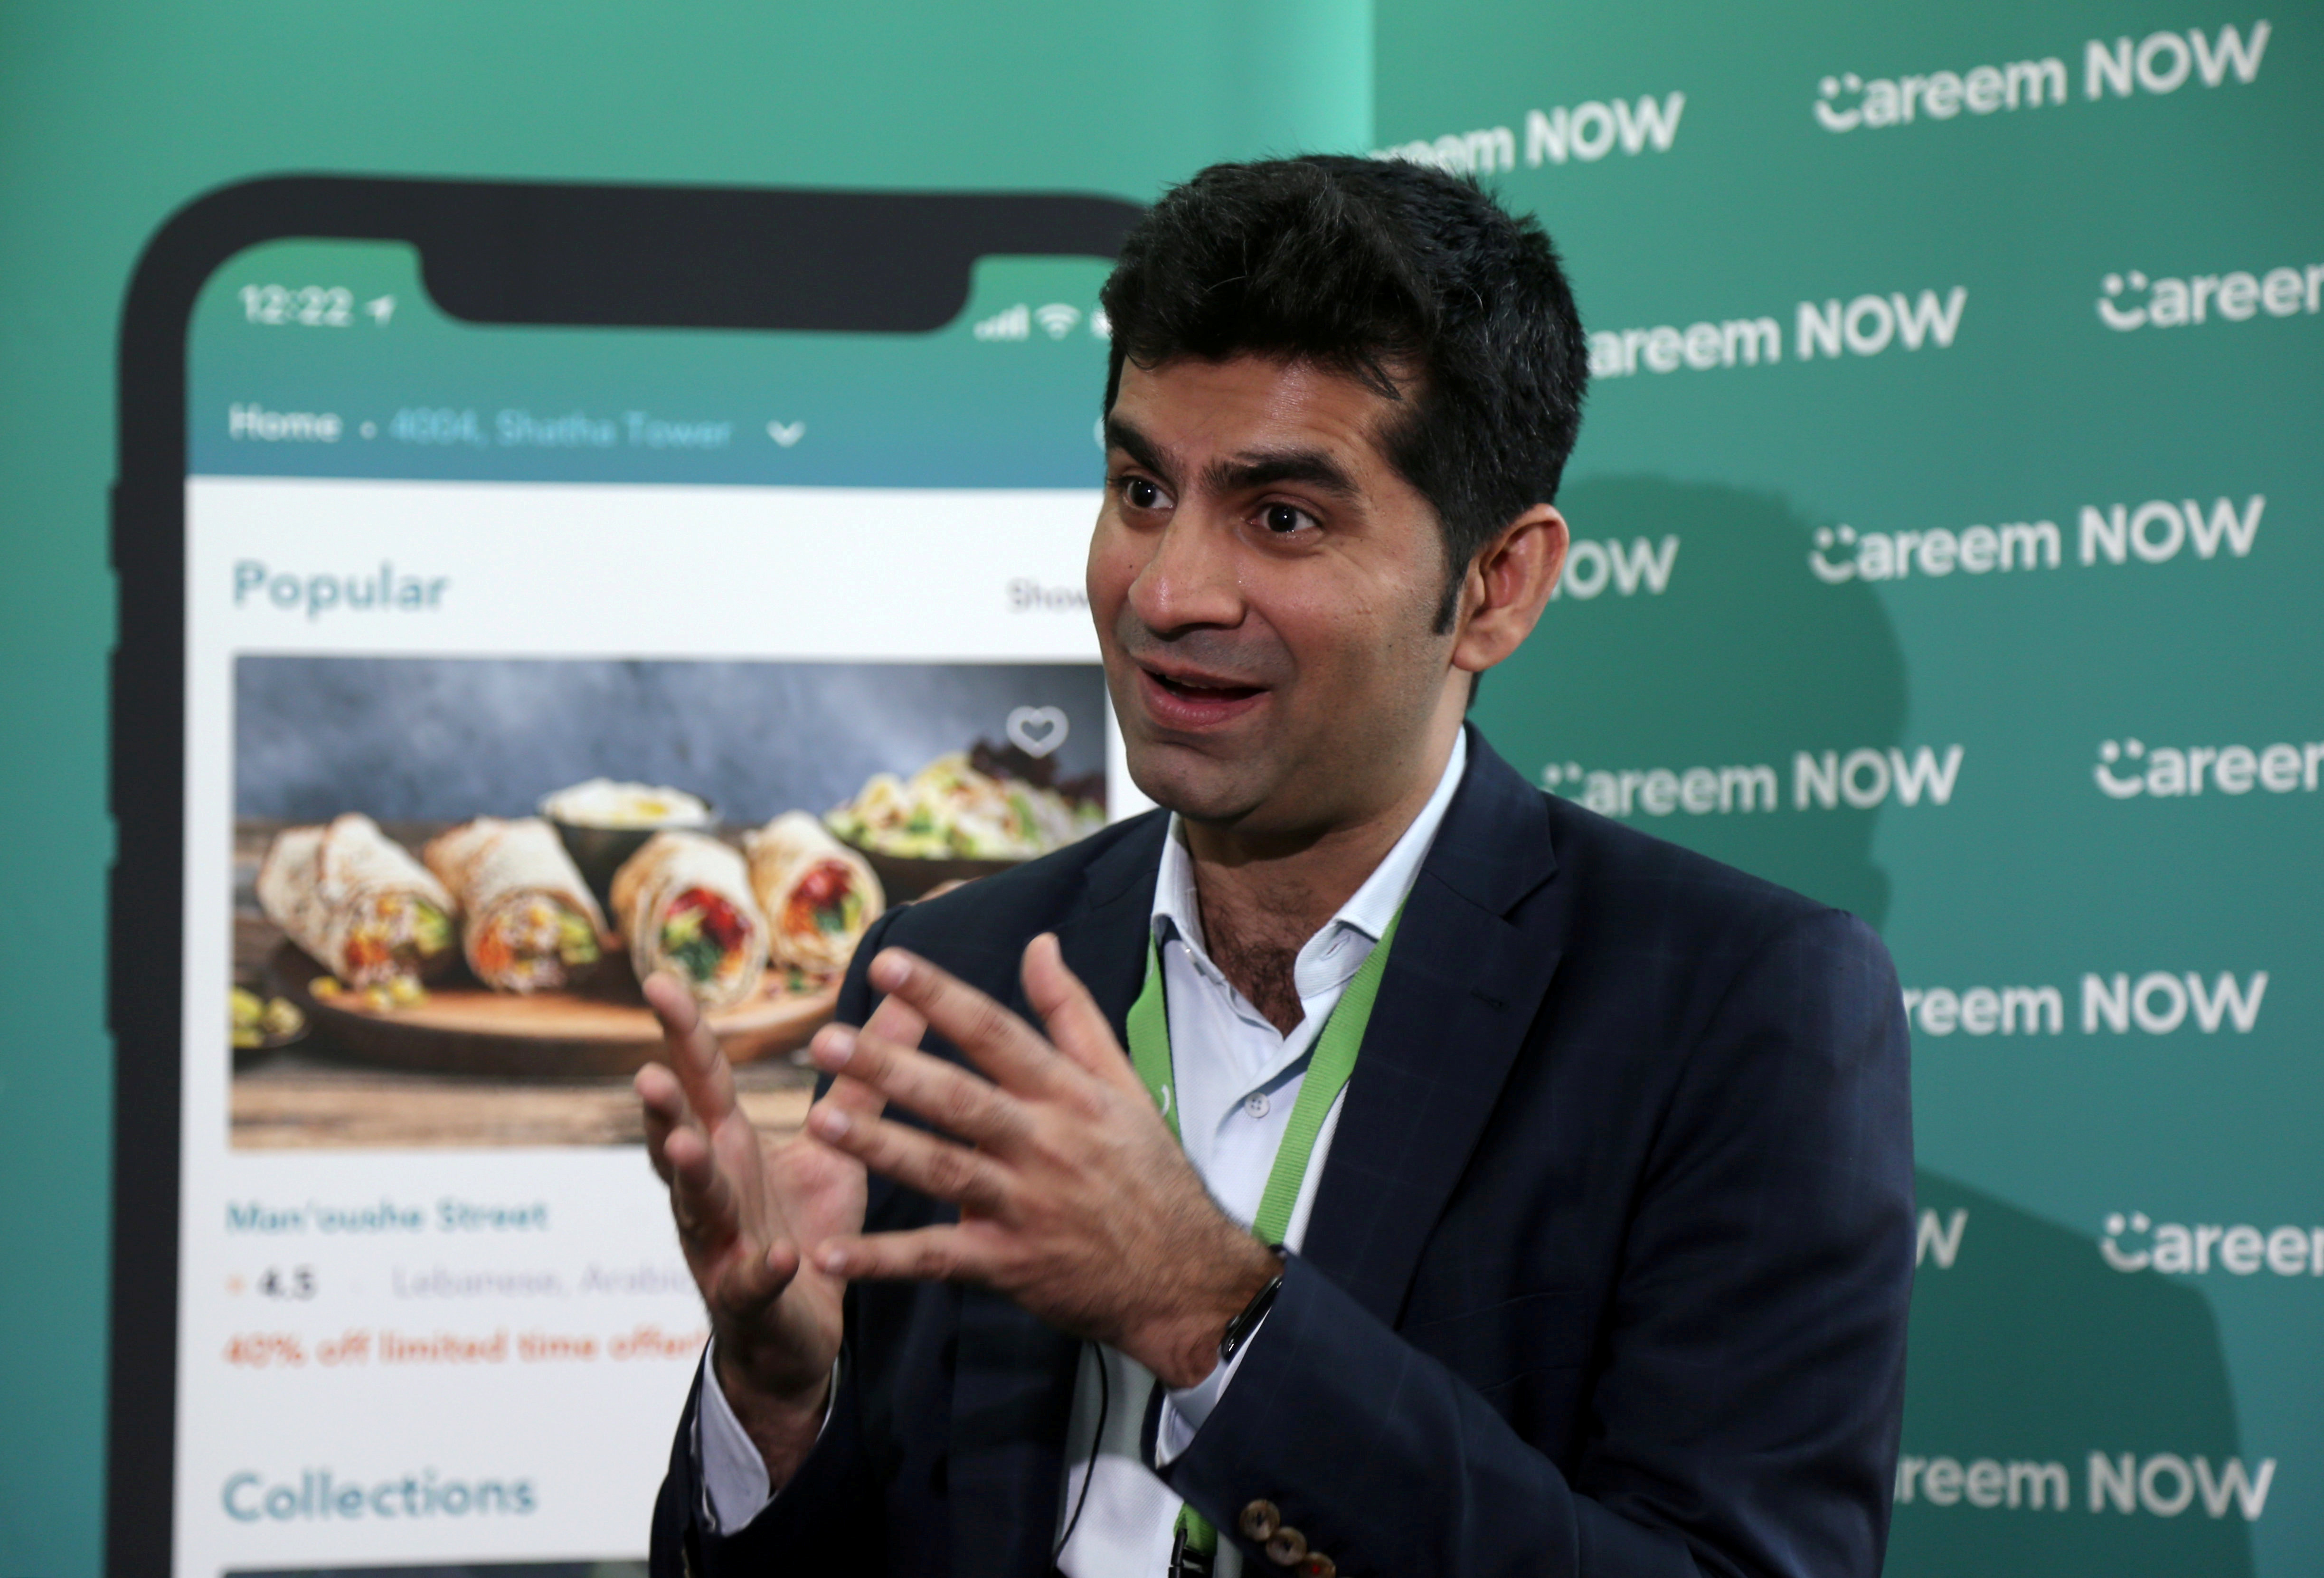 Careem CEO, Mudassir Sheikha speaks to Reuters in an interview at the company headquarters in Dubai.